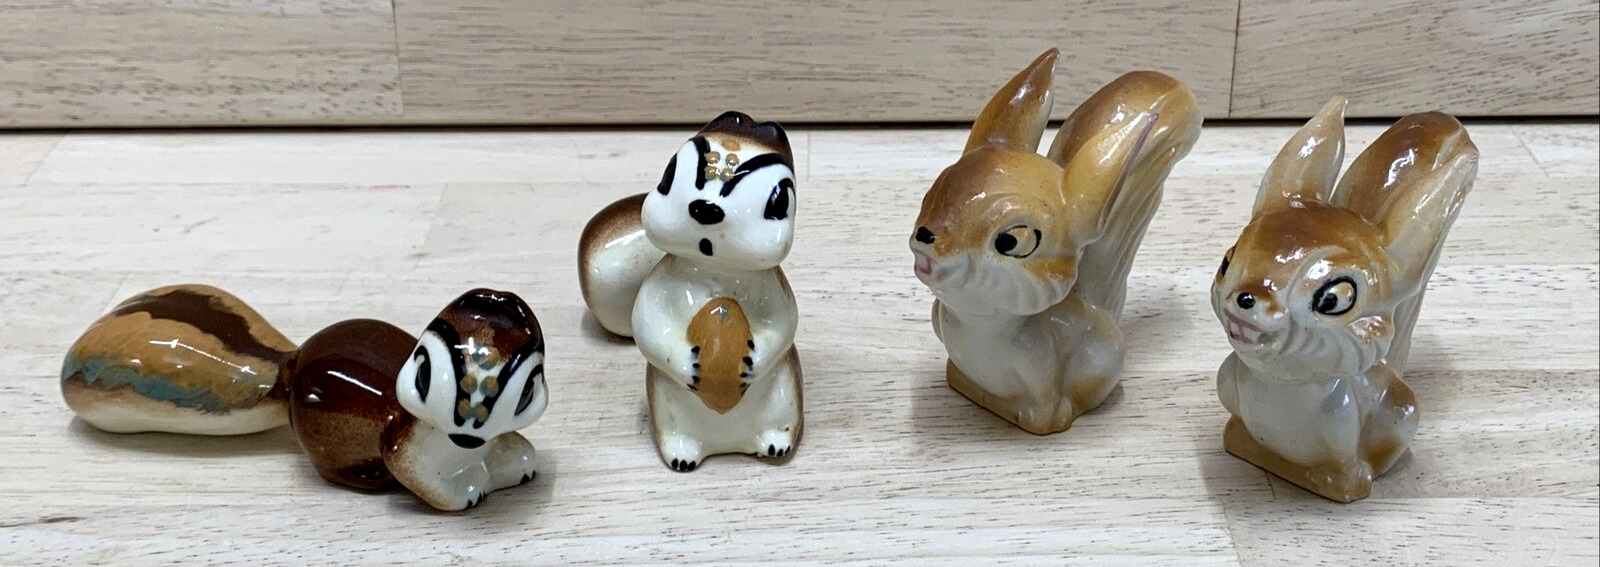 4 Vintage Ceramic Porcelain Squirrel figures Made Japan Hand Painted Mixed Lot